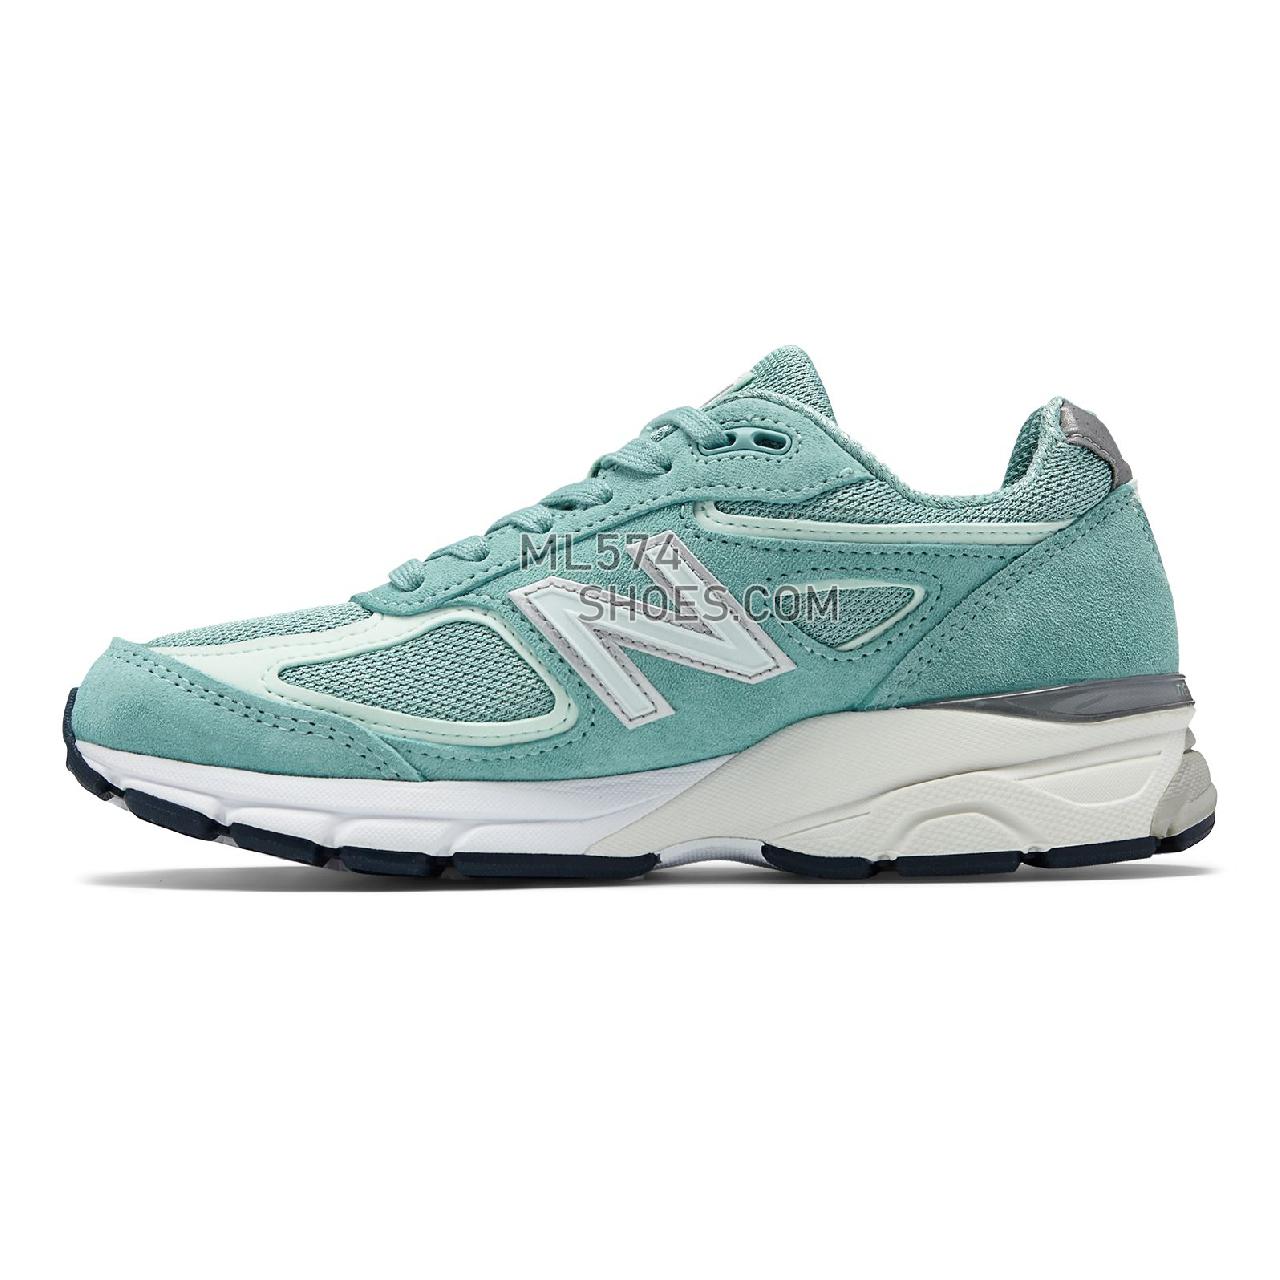 New Balance Mens 990v4 Made in US - Men's 990 - Running Mineral Sage with Seafoam - M990MS4